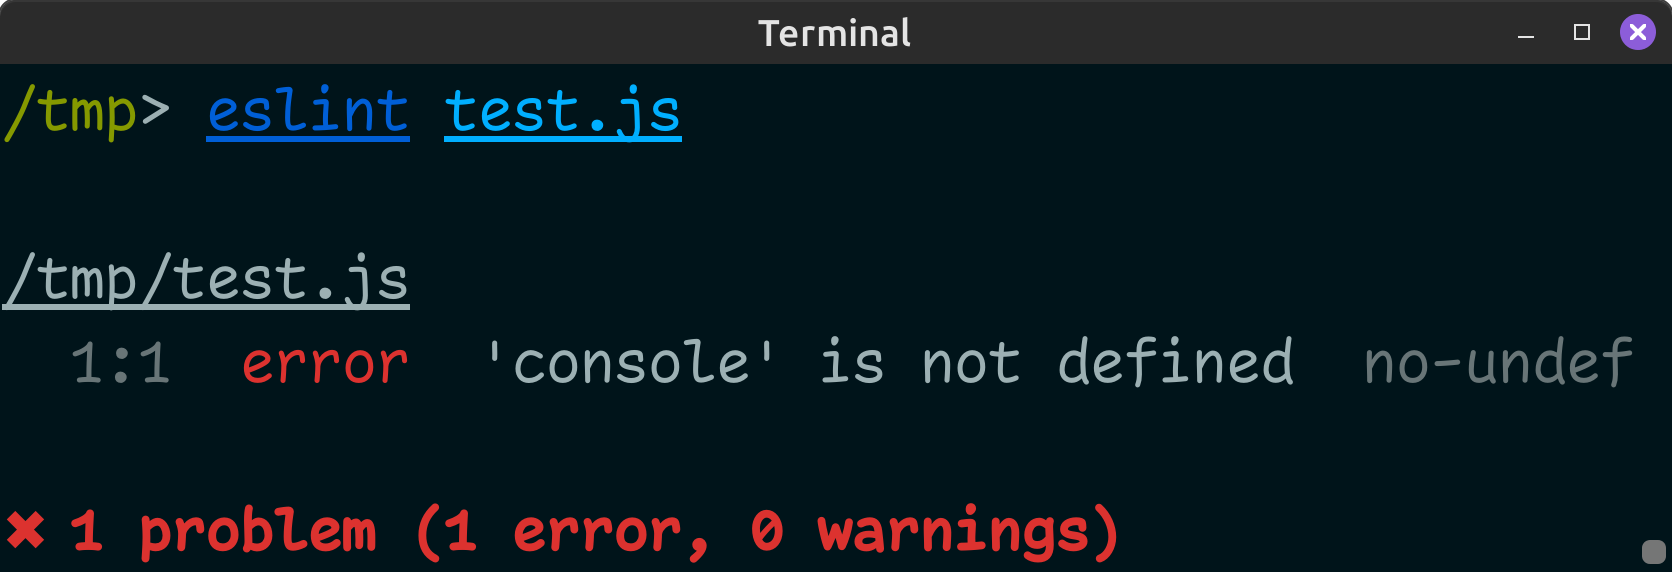 ESLint reporting error: 'console' is not defined (no-undef)